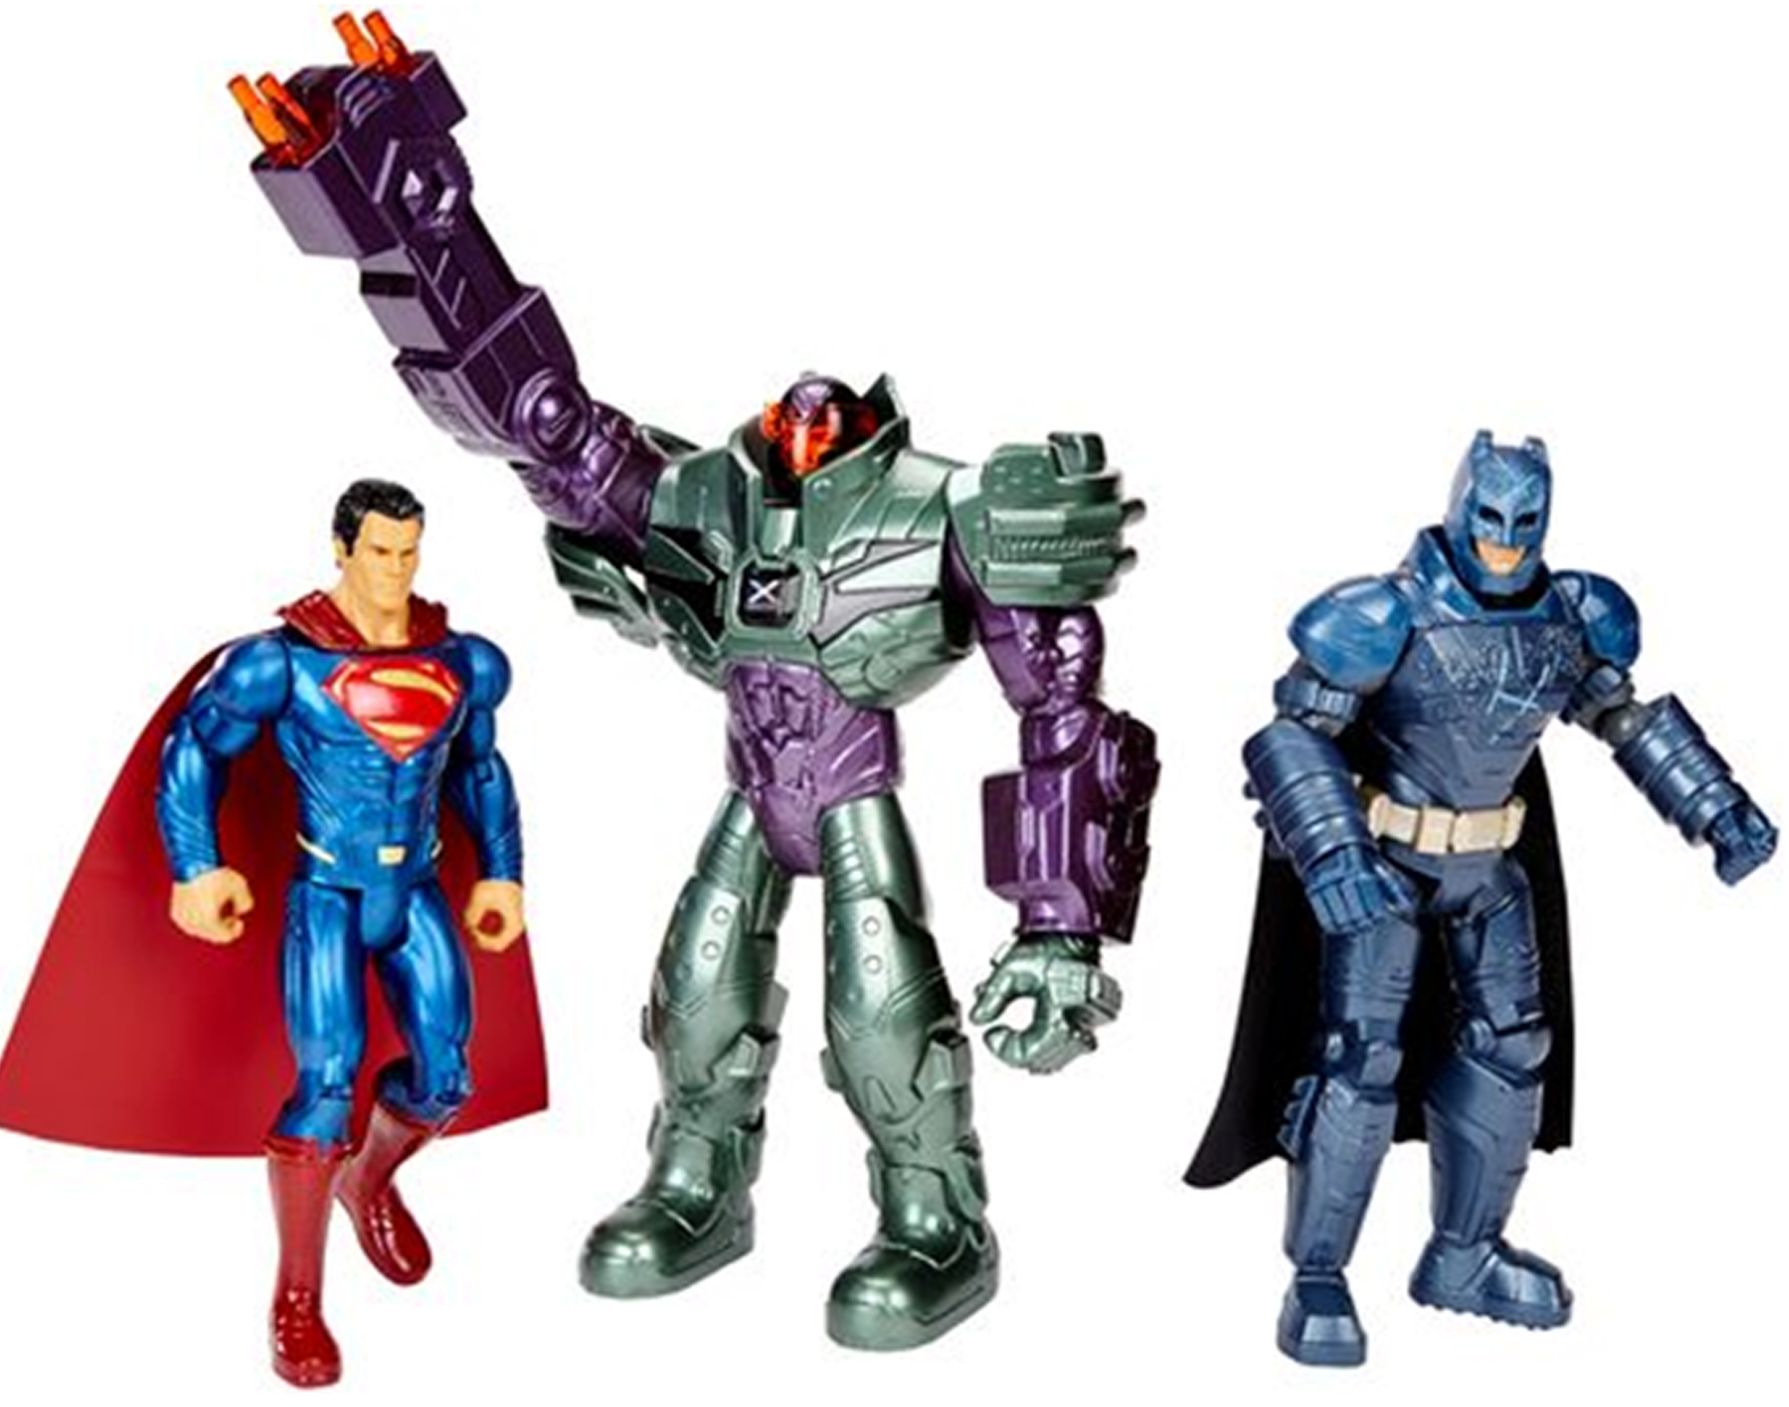 Superman, Batman, & Lex Luthor Action Figure 3 Pack: 6" authentic movie inspired figures with multiple points of articulation. SRP $24.99